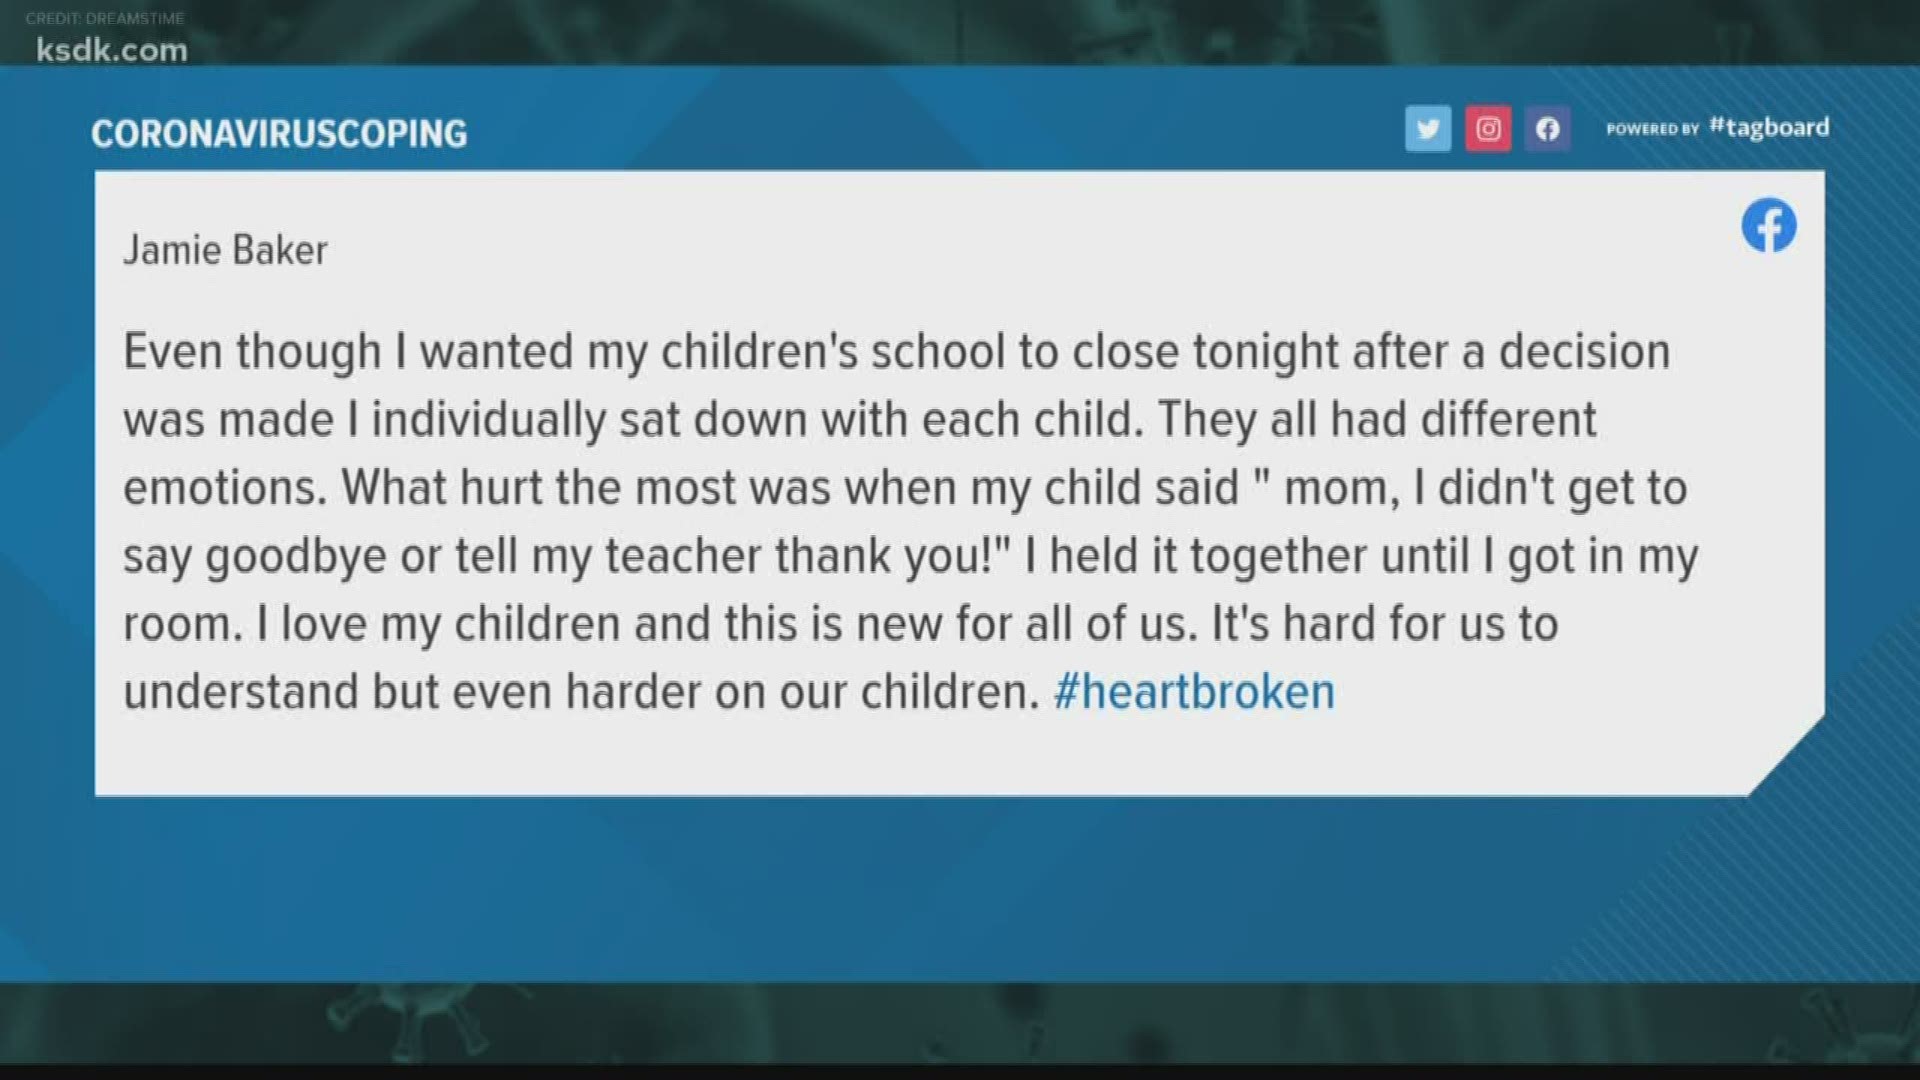 5 On Your Side has reached out to ask how our viewers are coping. Here are some of your responses.